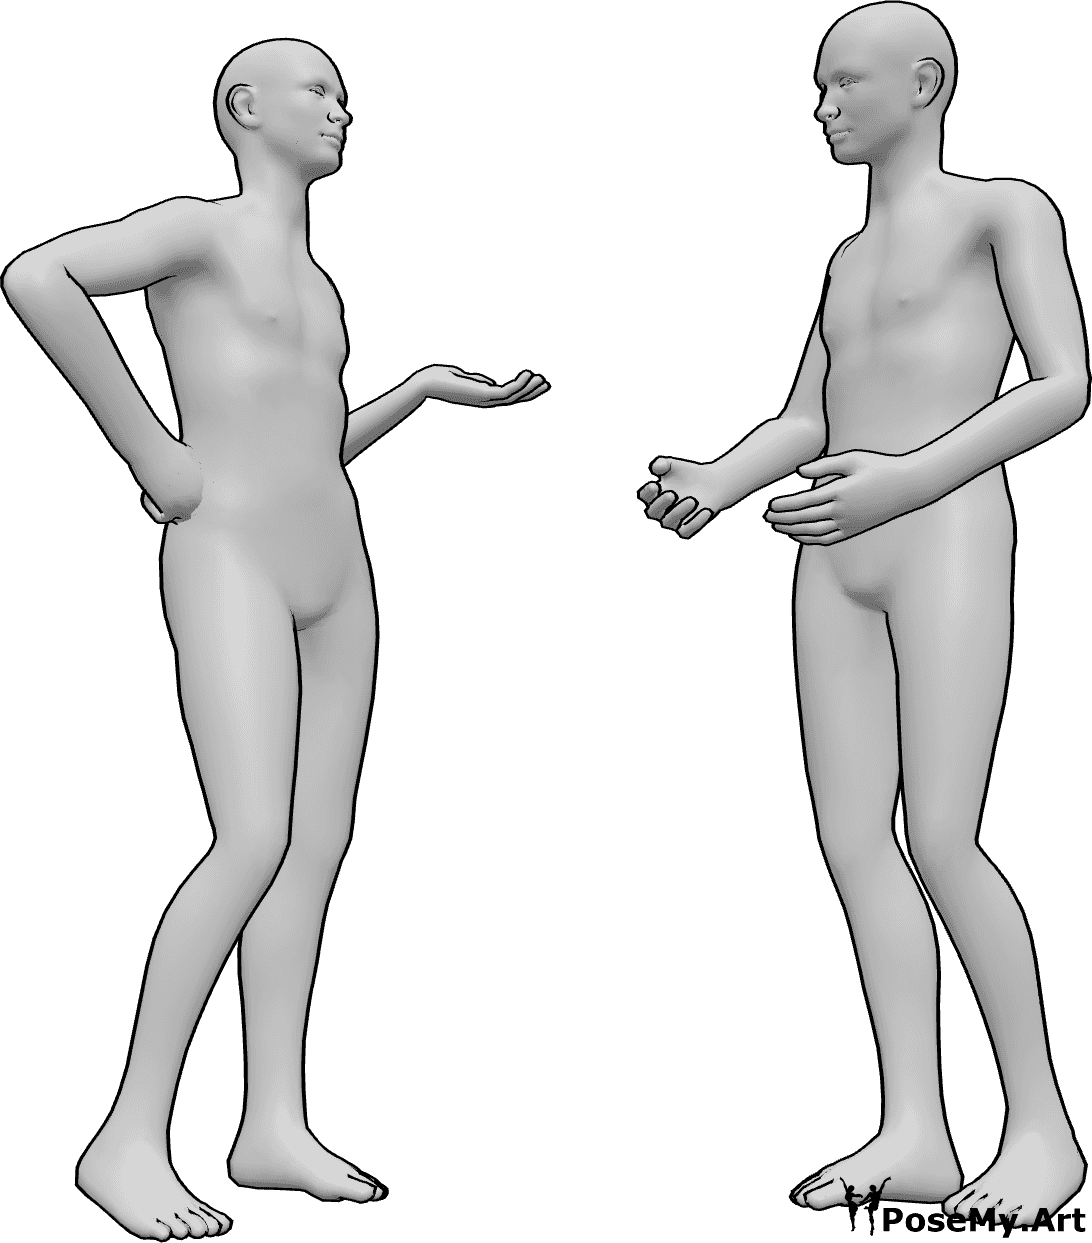 Pose Reference- Males standing talking pose - Two males are standing and talking, having a casual conversation